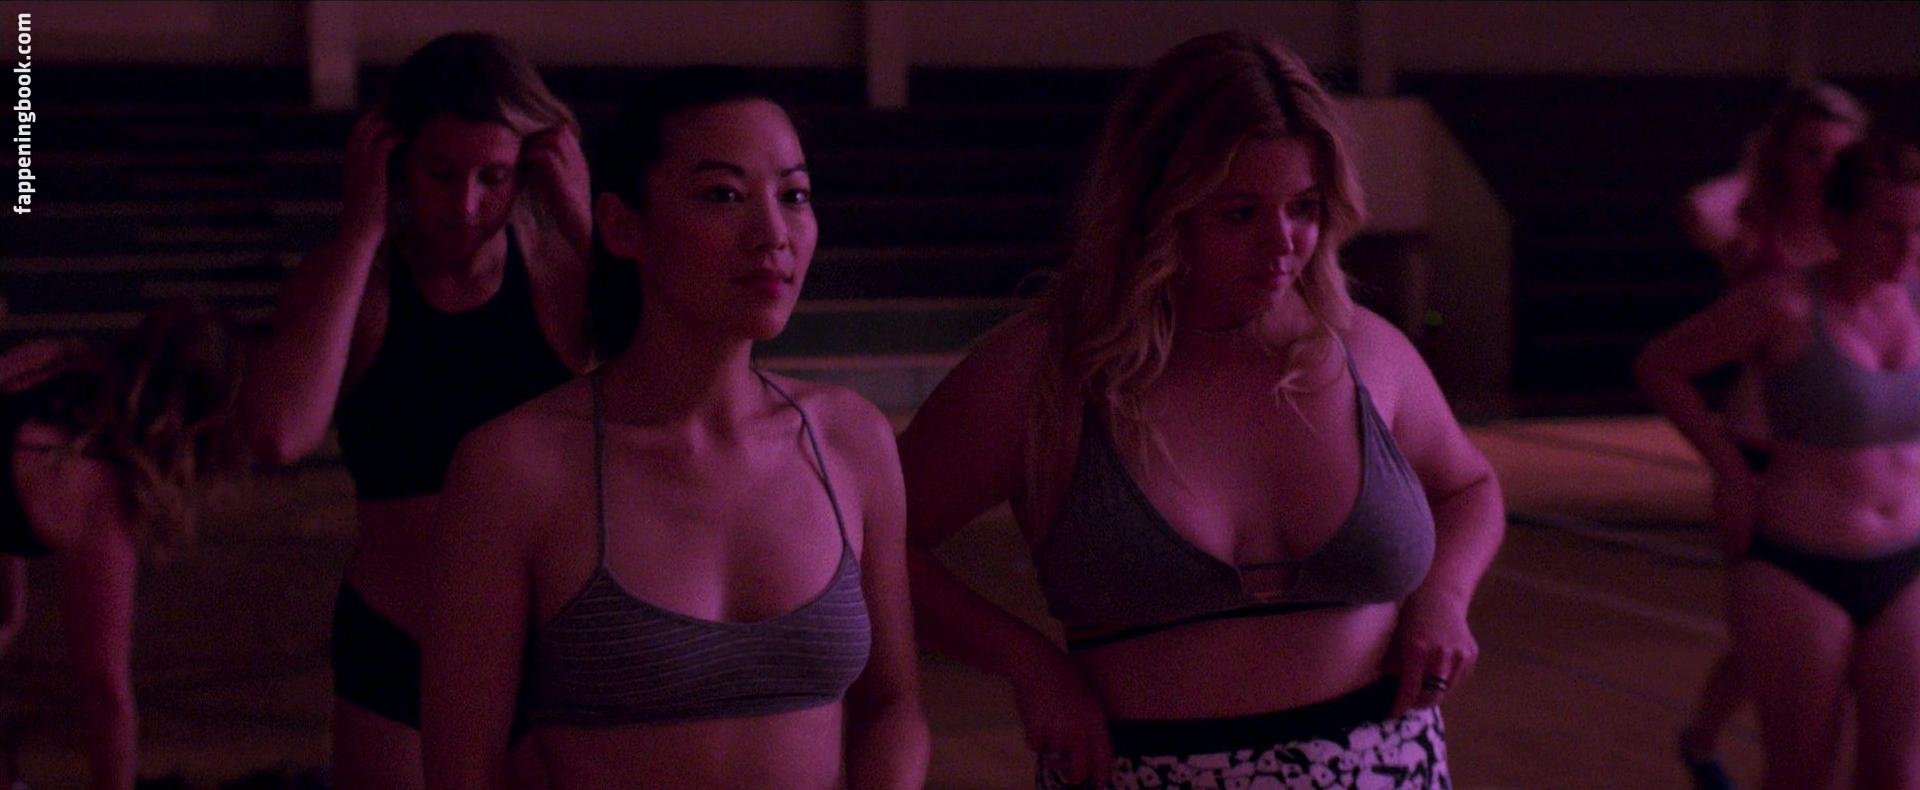 Arden Cho Nude, The Fappening - Photo #47097 - FappeningBook